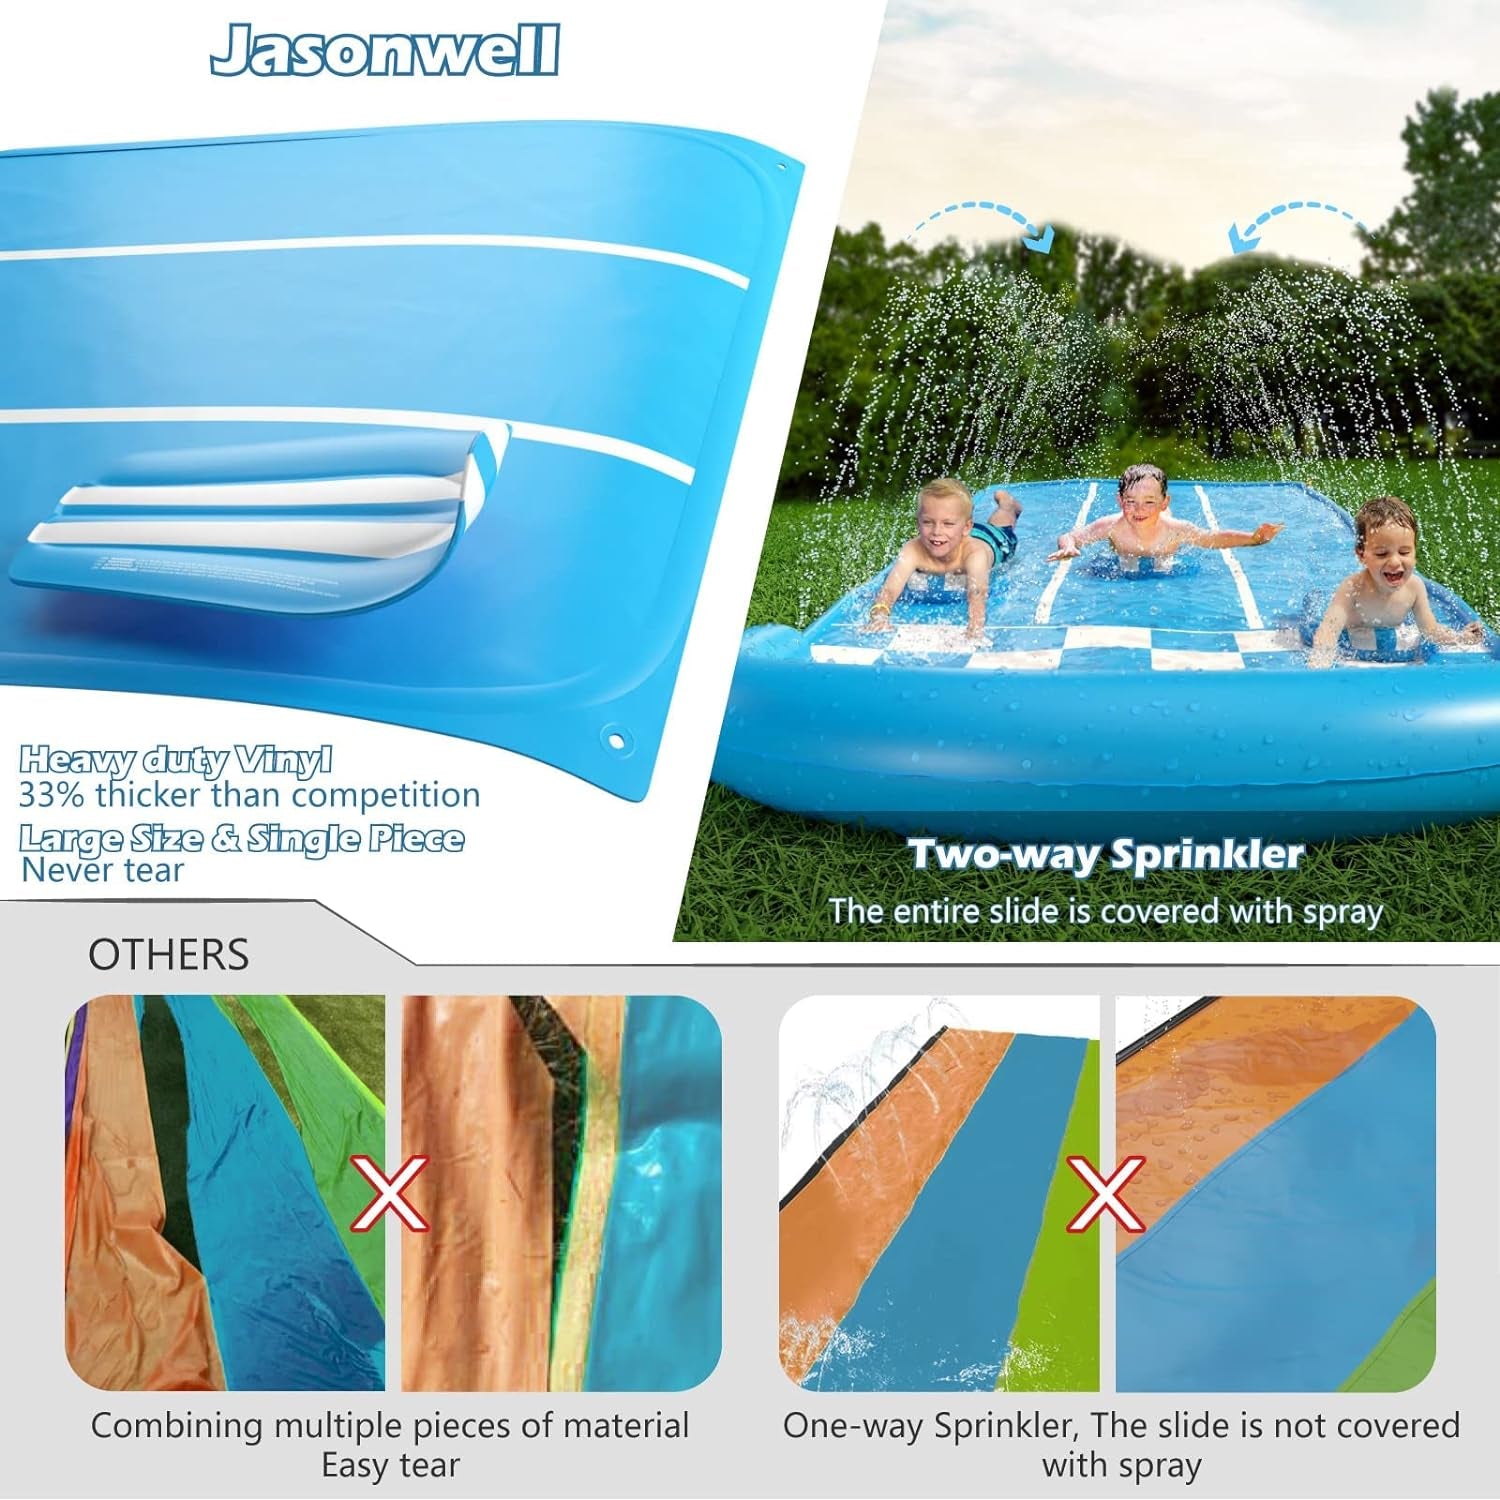 Slip and Slide Lawn Toy - Lawn Water Slides Summer Slip Waterslide for Kids Adults 20Ft Extra Long with Sprinkler N 3 Bodyboards Backyard Games Outdoor Splash Water Toys outside Play Park